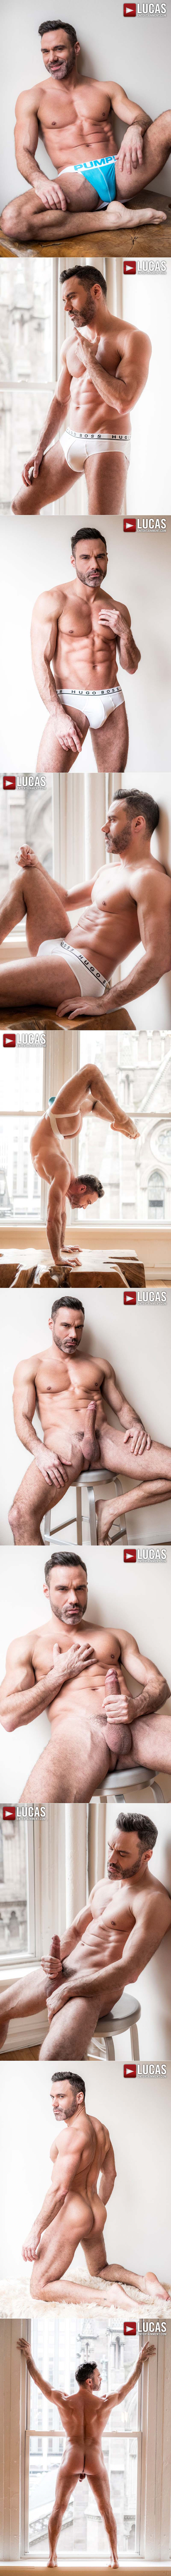 Servicing Daddy's Dick, Scene 3 (Manuel Skye and Stas Landon Share Aaron Perez) at Lucas Entertainment